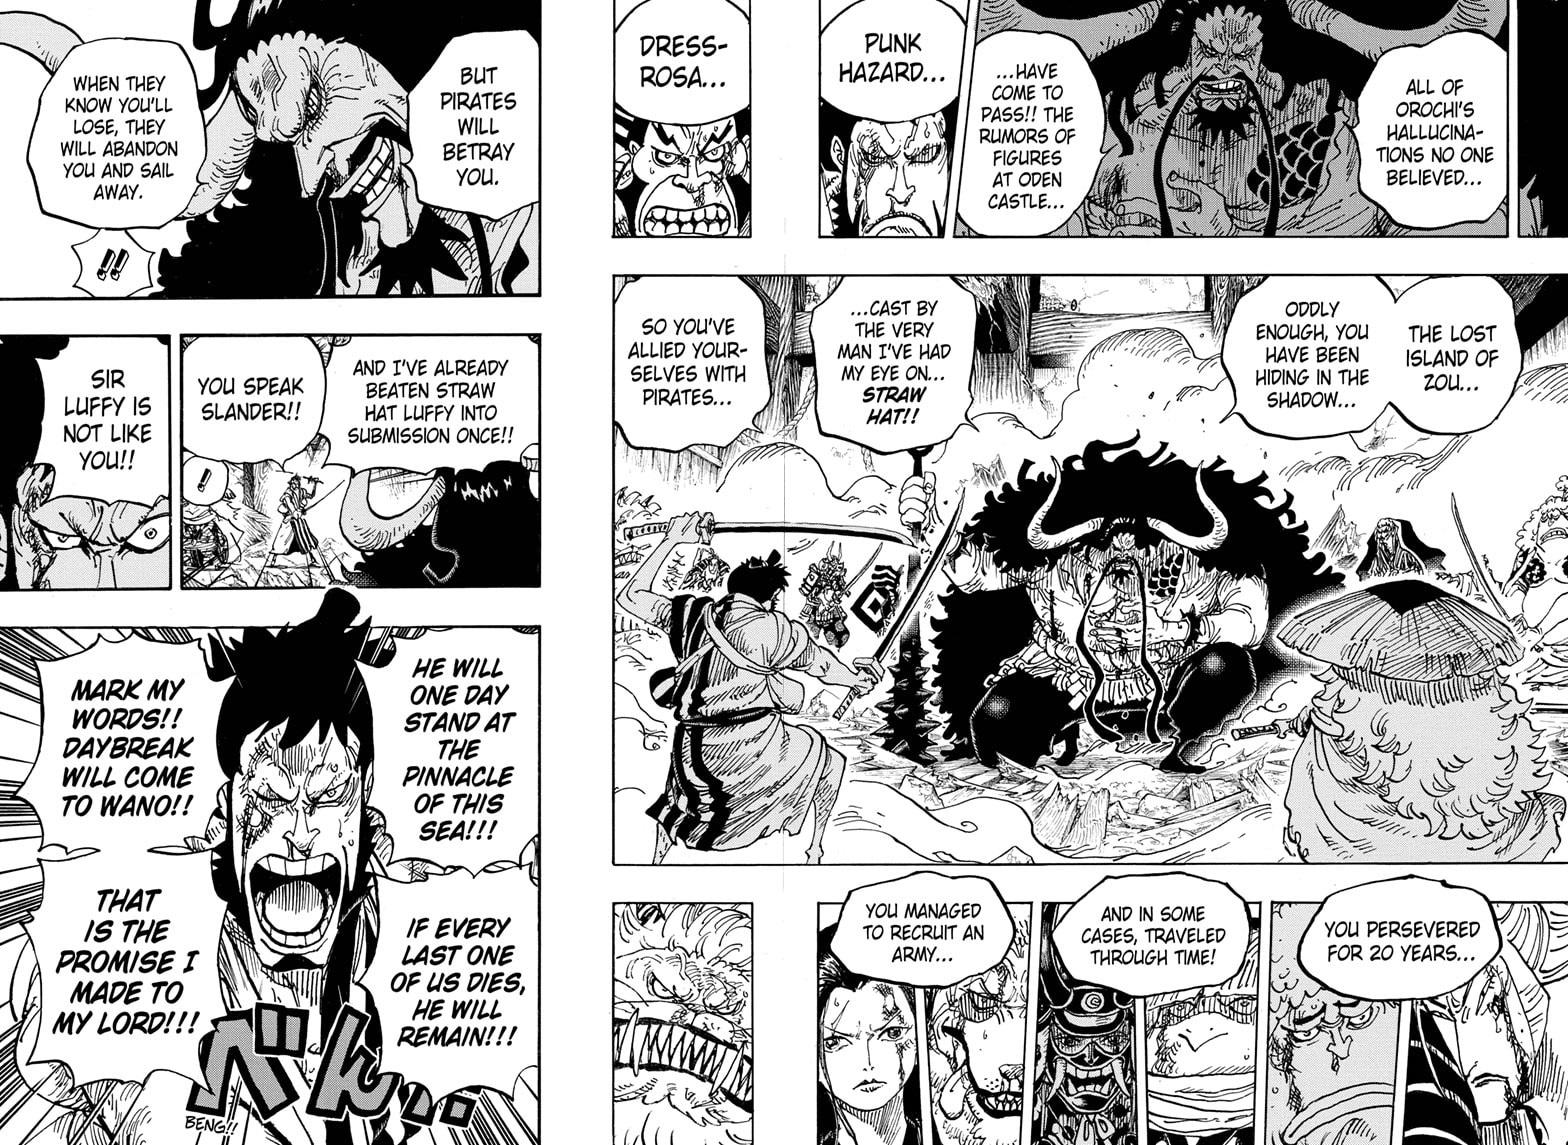 One Piece Chapter 987 One Piece Manga Online